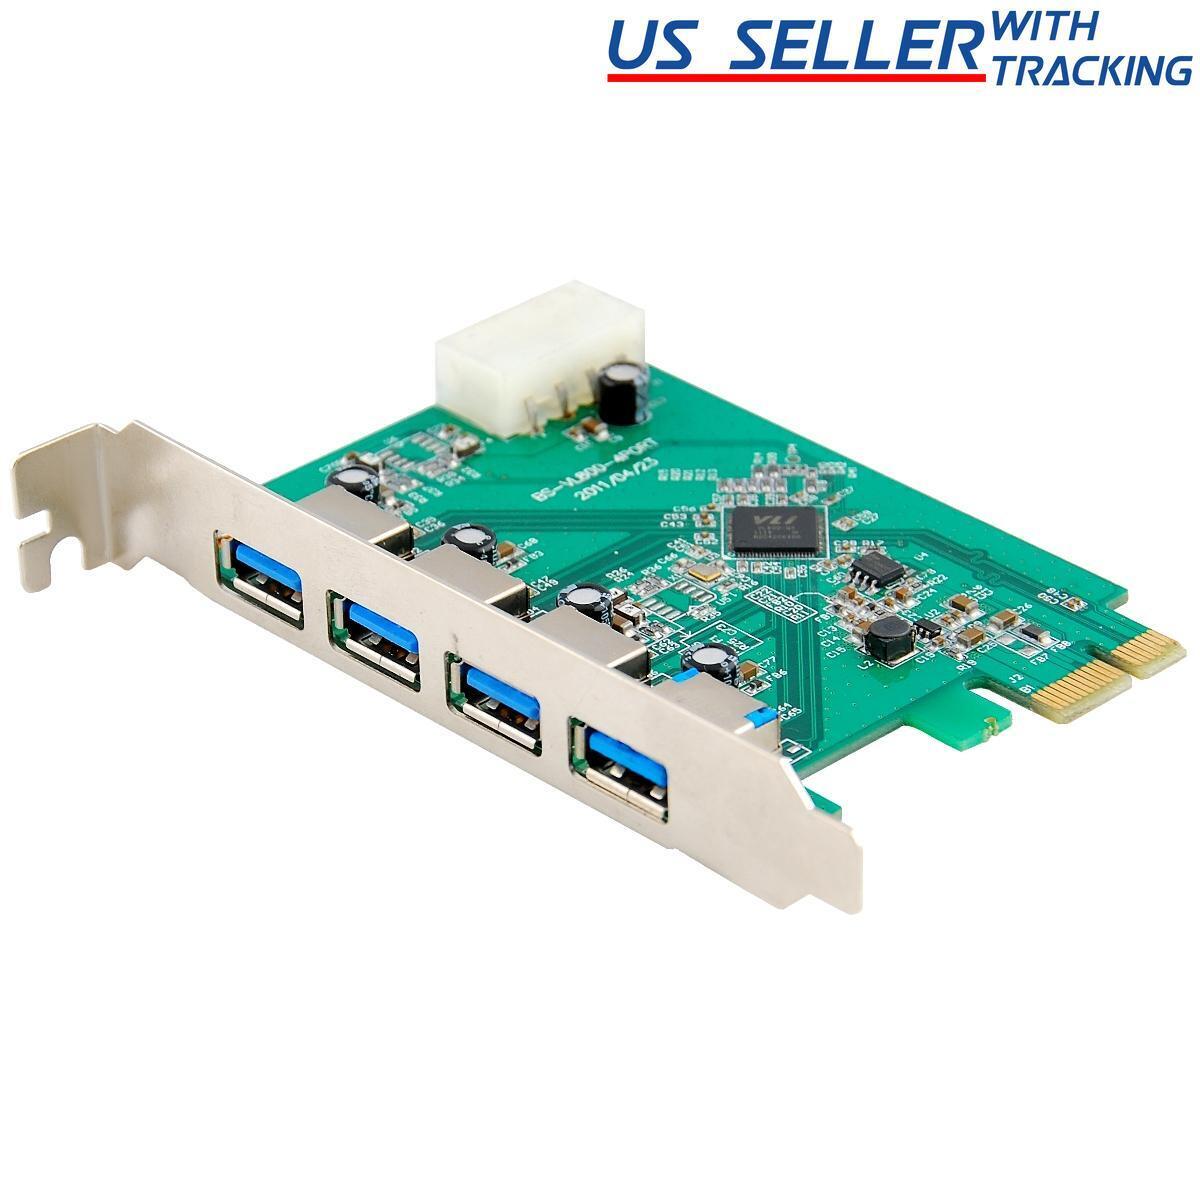 Protronix 4-Port SuperSpeed USB 3.0 PCI-Express Controller Card